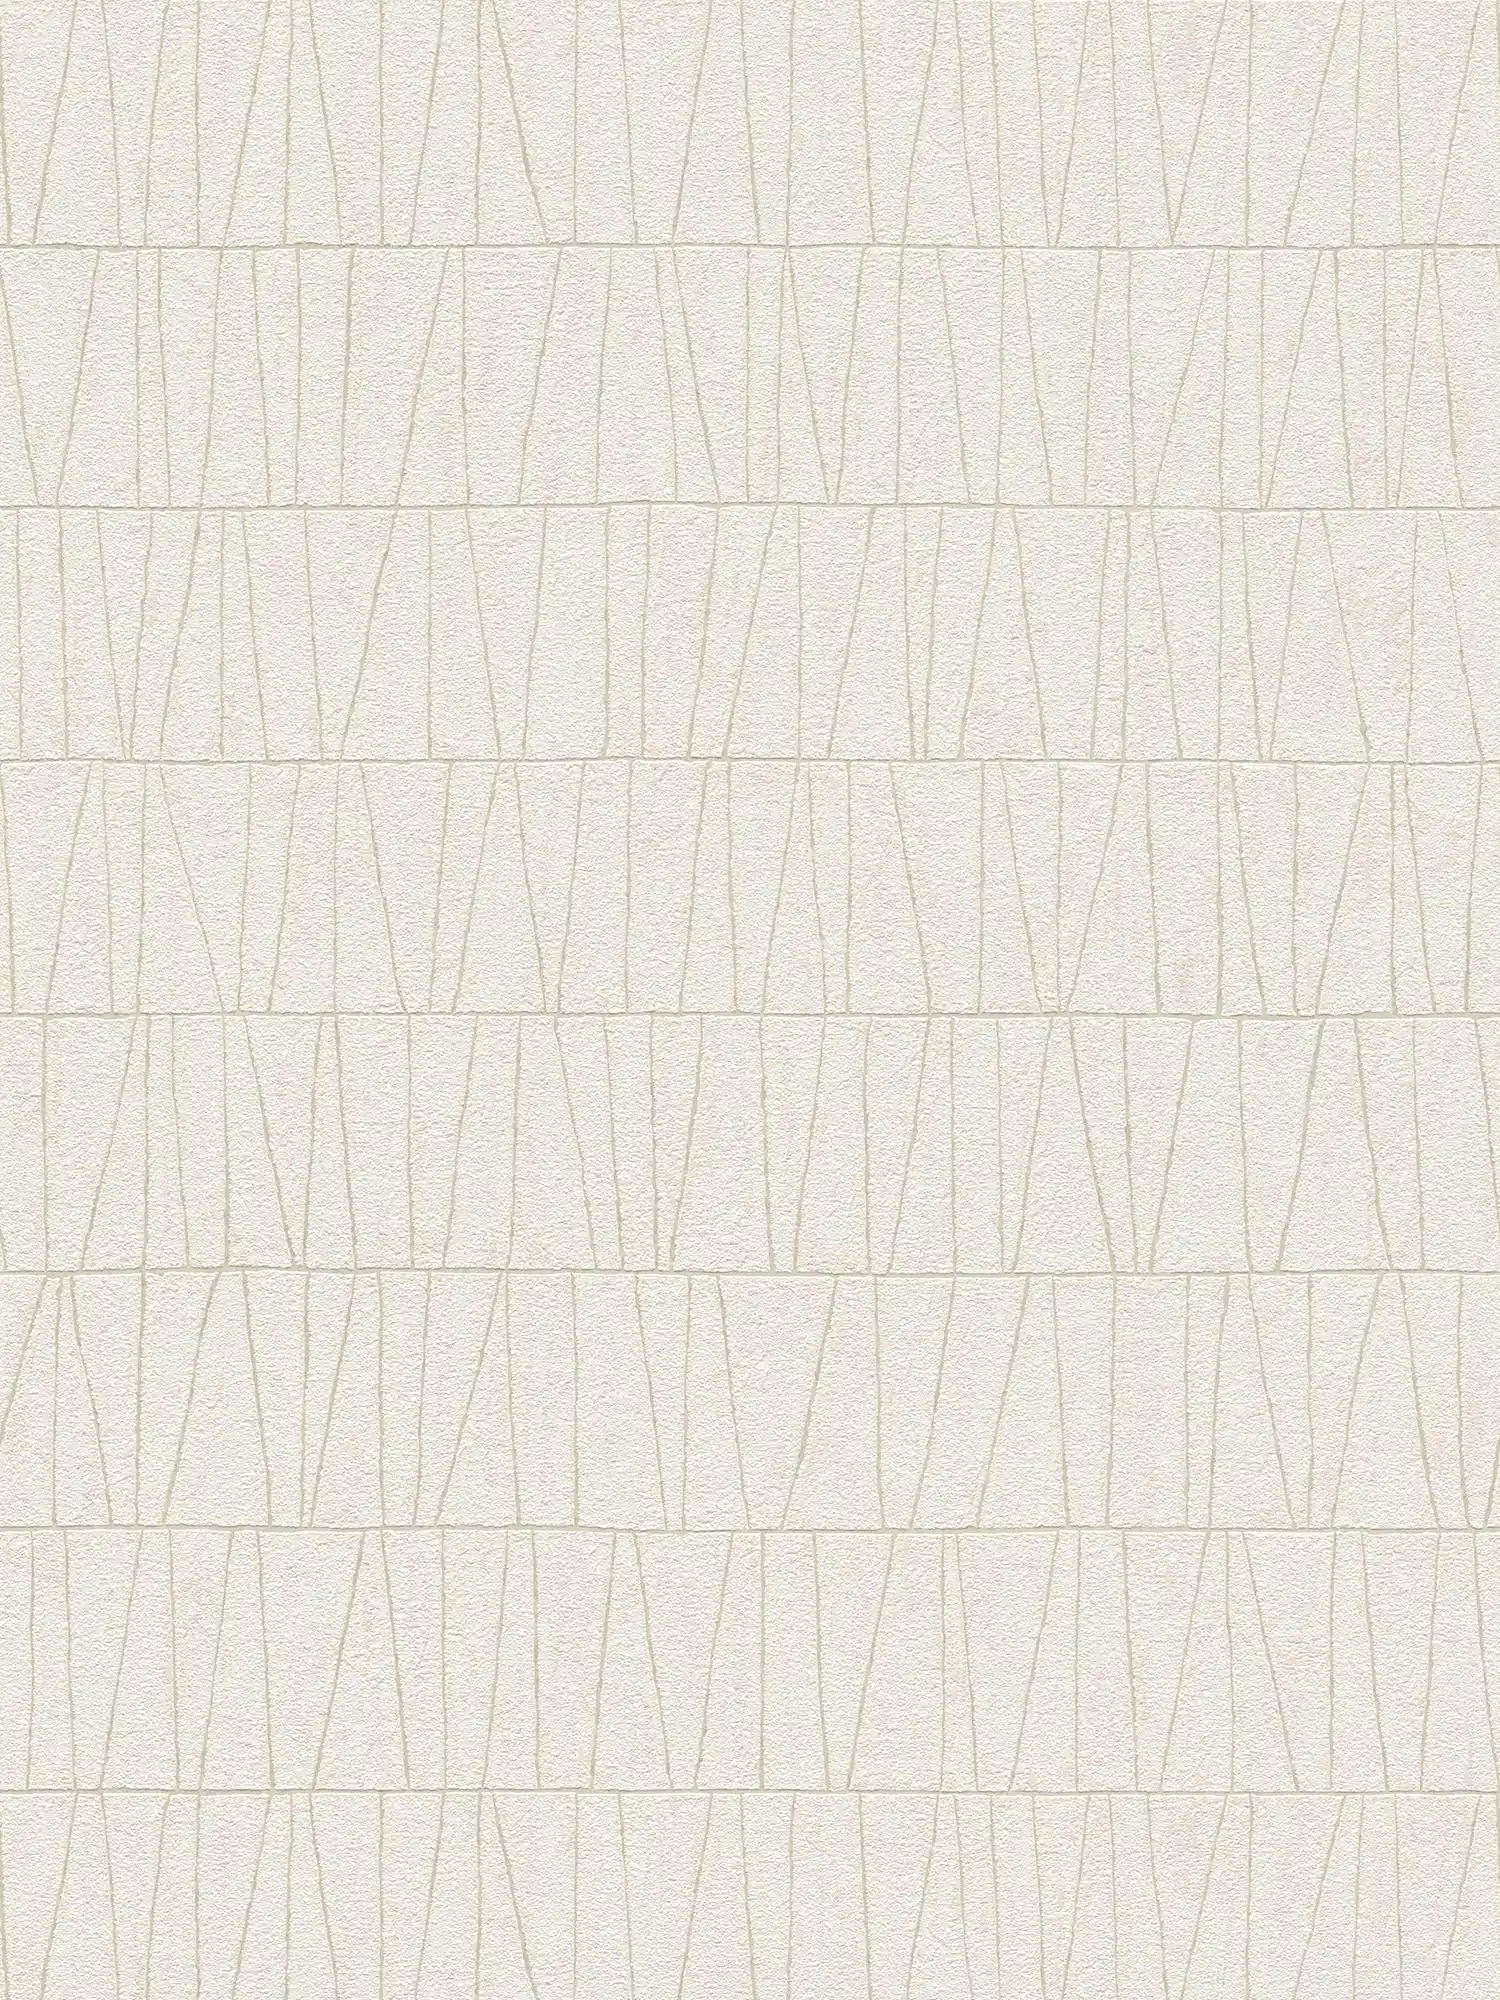 Pattern wallpaper with linear arrangement - white, gold
